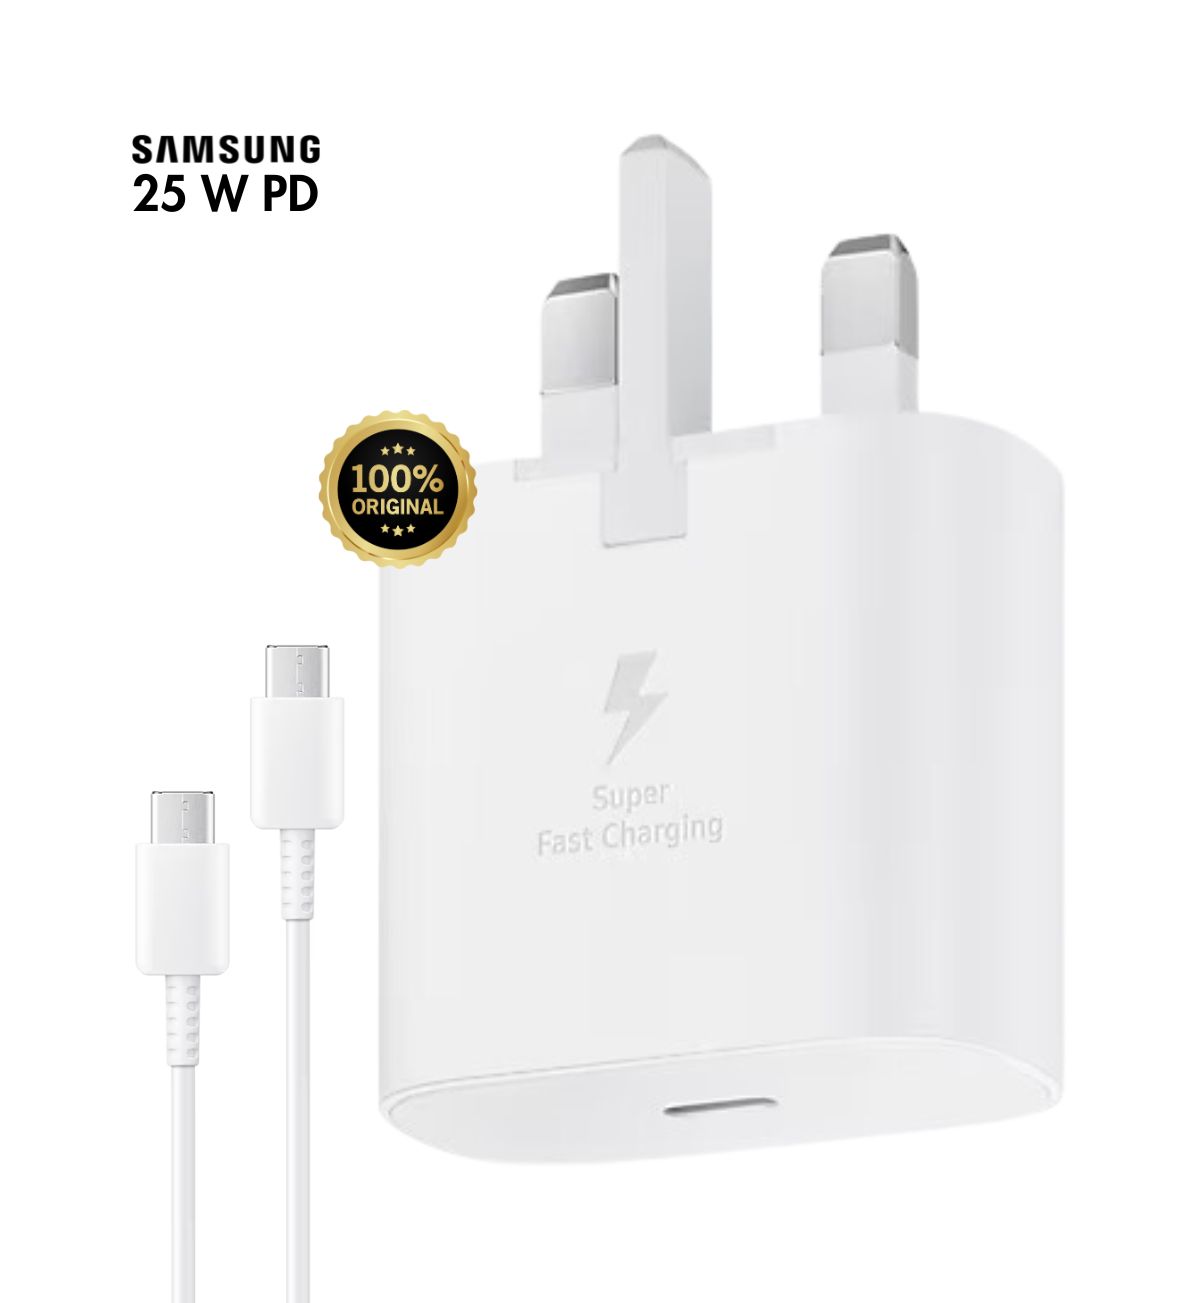 Close-up of the front view of a genuine Samsung 25W Super Fast Charging Travel Adapter (White). The image showcases the Samsung logo, wattage (25W), and Super Fast Charging text clearly visible.